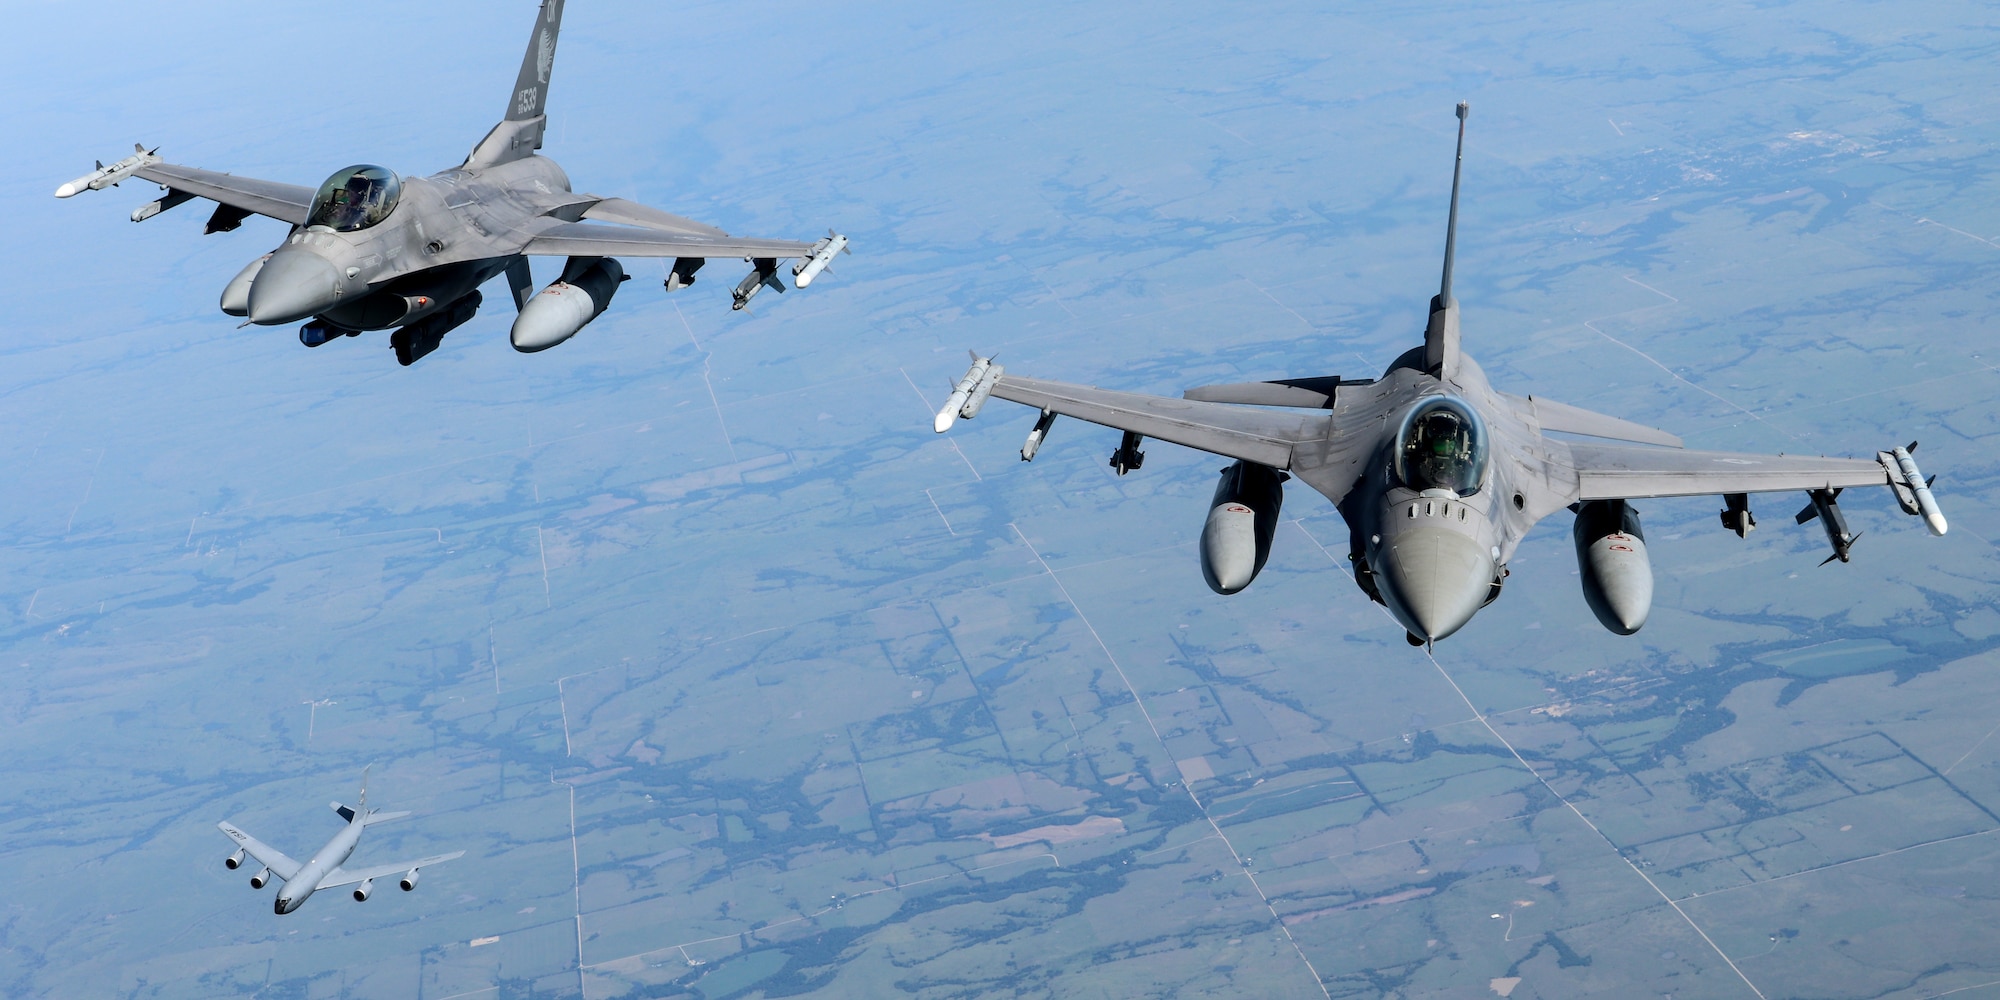 Two 138th Fighter Wing F-16 Fighting Falcons and a 507th Air Refueling Wing KC-135R Statotanker fly behind 507th ARW tanker during a congressional orientation flight, Aug. 15, 2019, at Tinker Air Force Base, Oklahoma. The Okies shared the Reserve mission and a unique experience with the congressional delegation. (U.S. Air Force photo by Senior Airman Mary Begy)